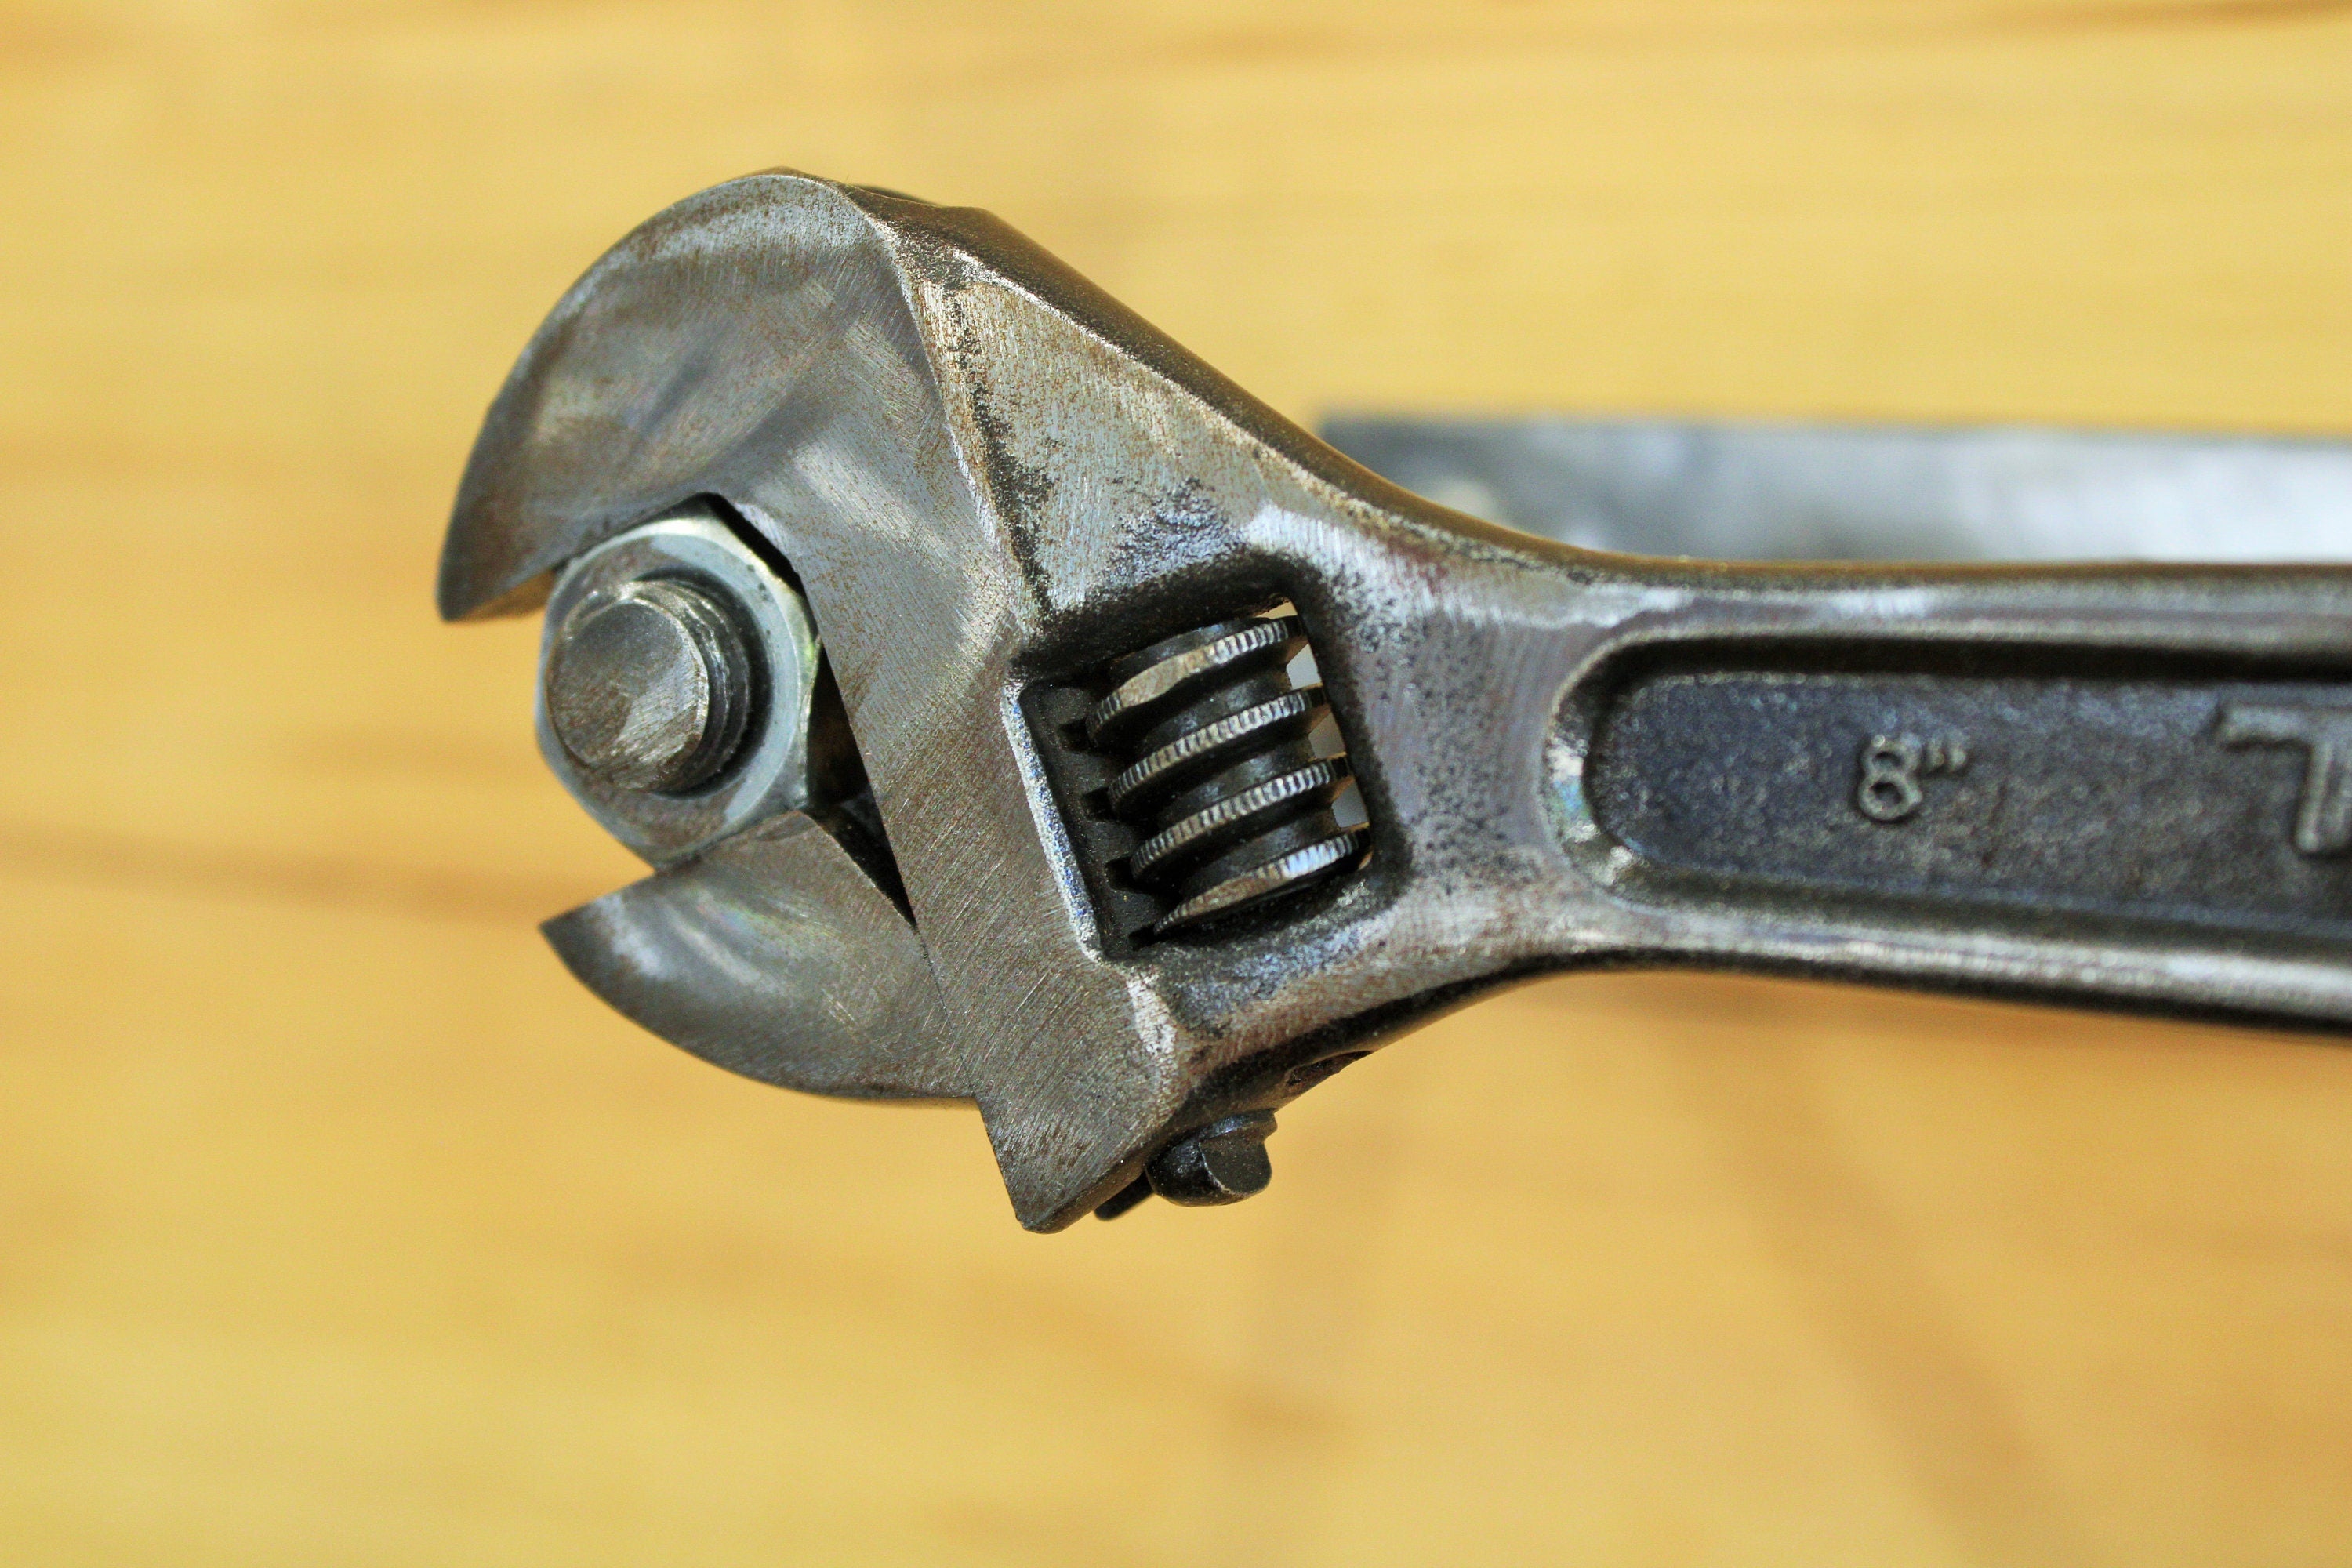 Close-up view of a wrench and nut toilet paper holder, finished in silver.